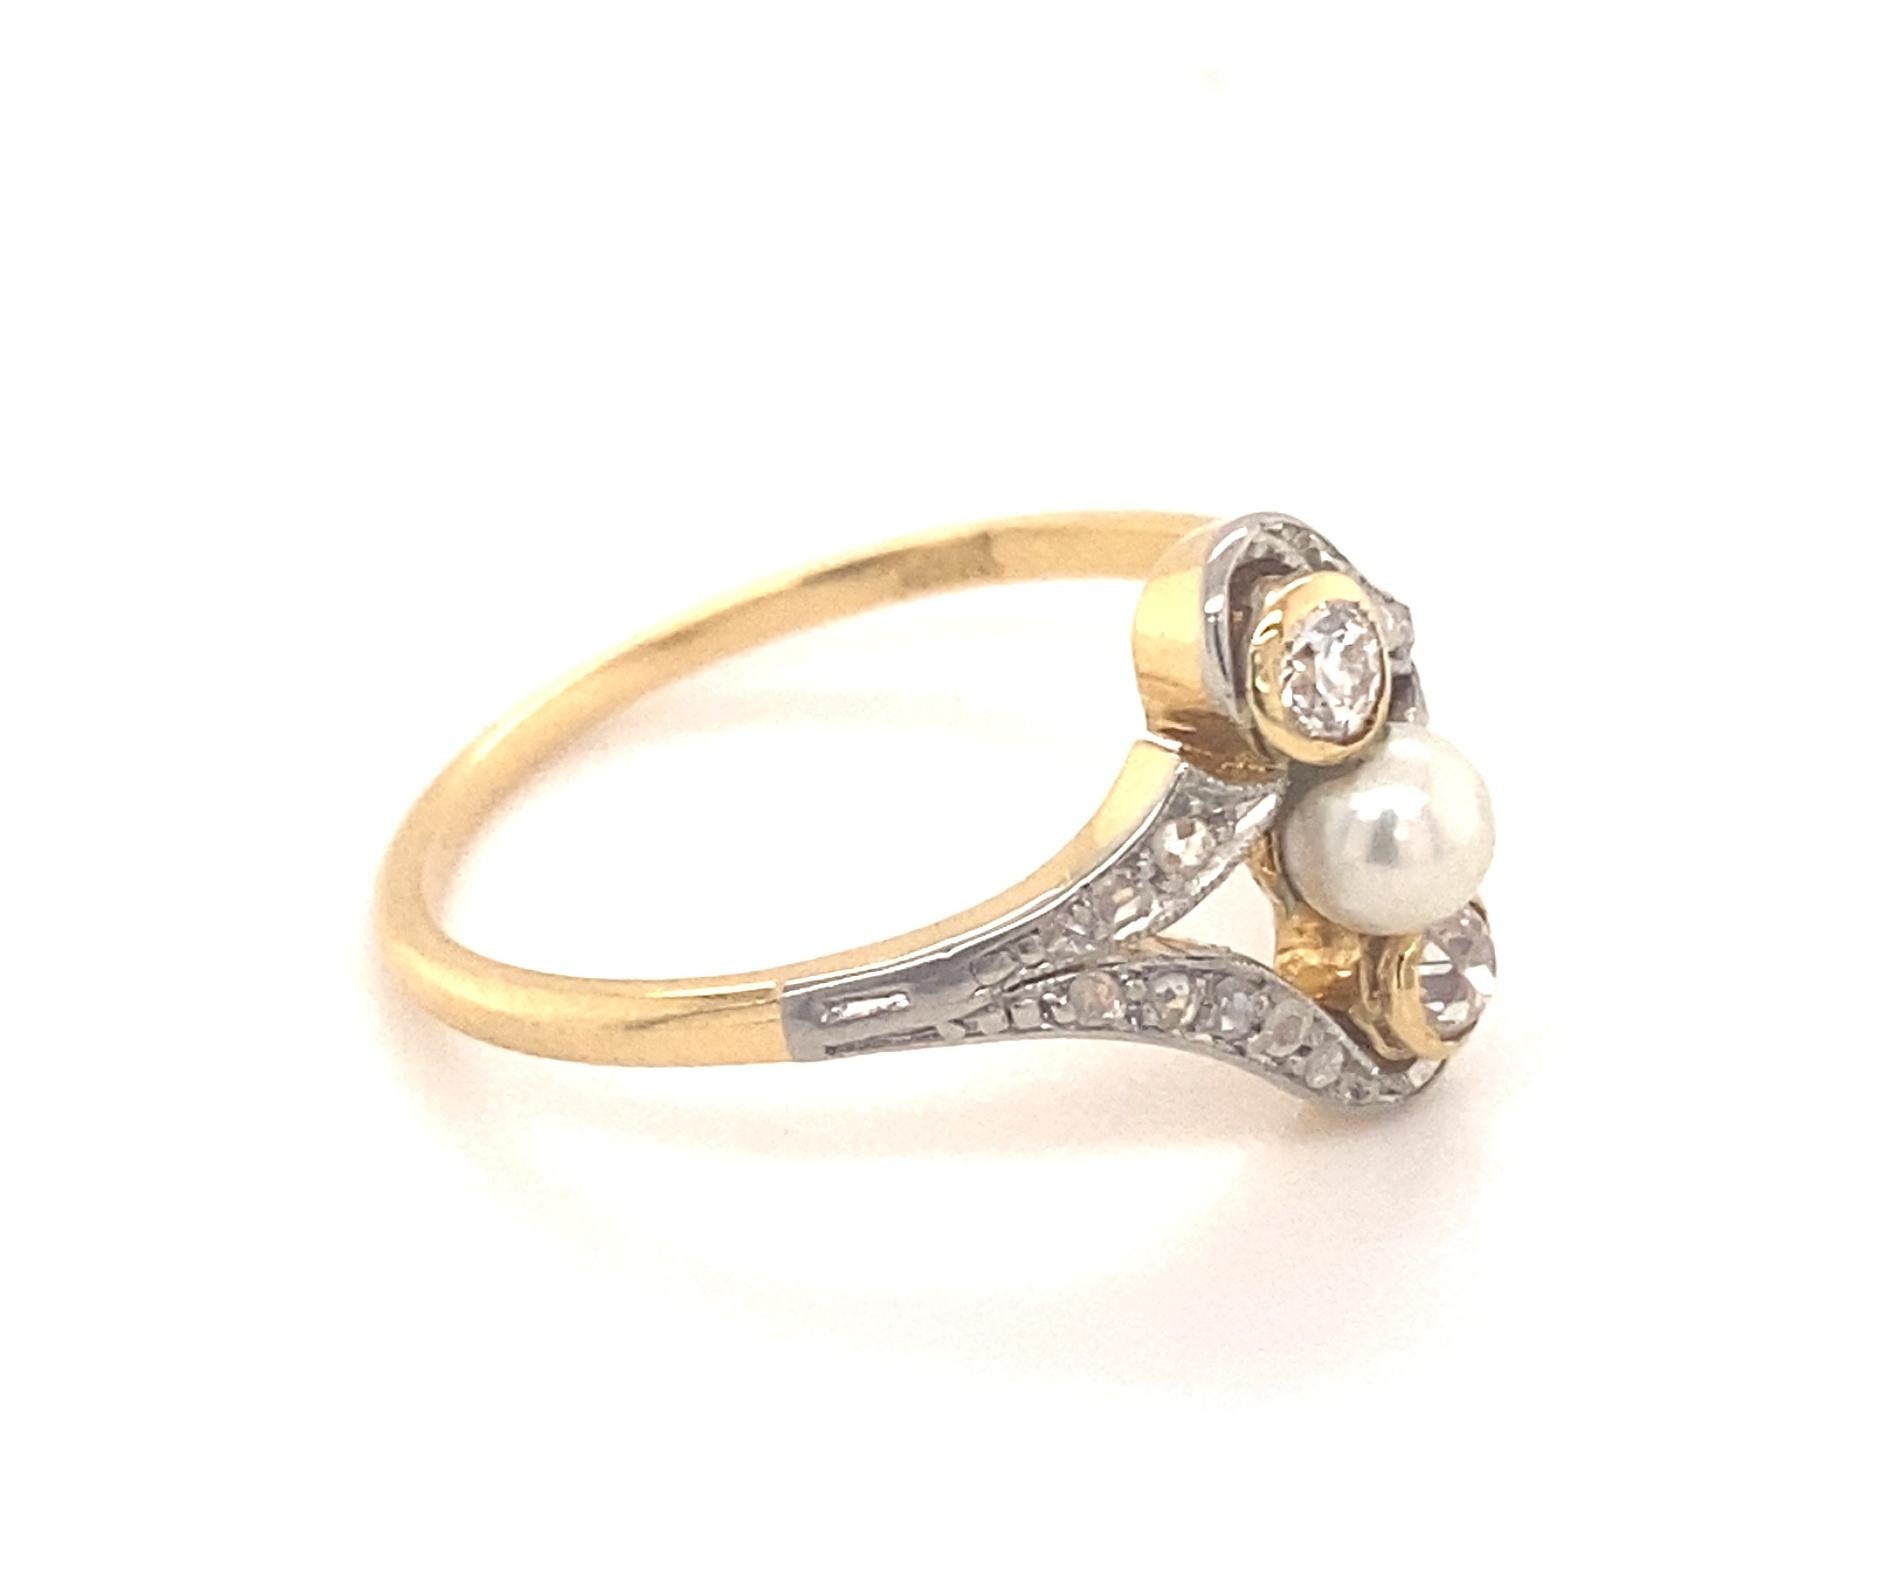 Original Art Deco Diamond Pearl Platinum 18k Yellow Gold Ring. This is a beautiful art deco pearl old mine cut diamond set in platinum 18k yellow gold ring. The center pearl measures 4mm and has nice luster. On the two sides of the pearl are 2 old